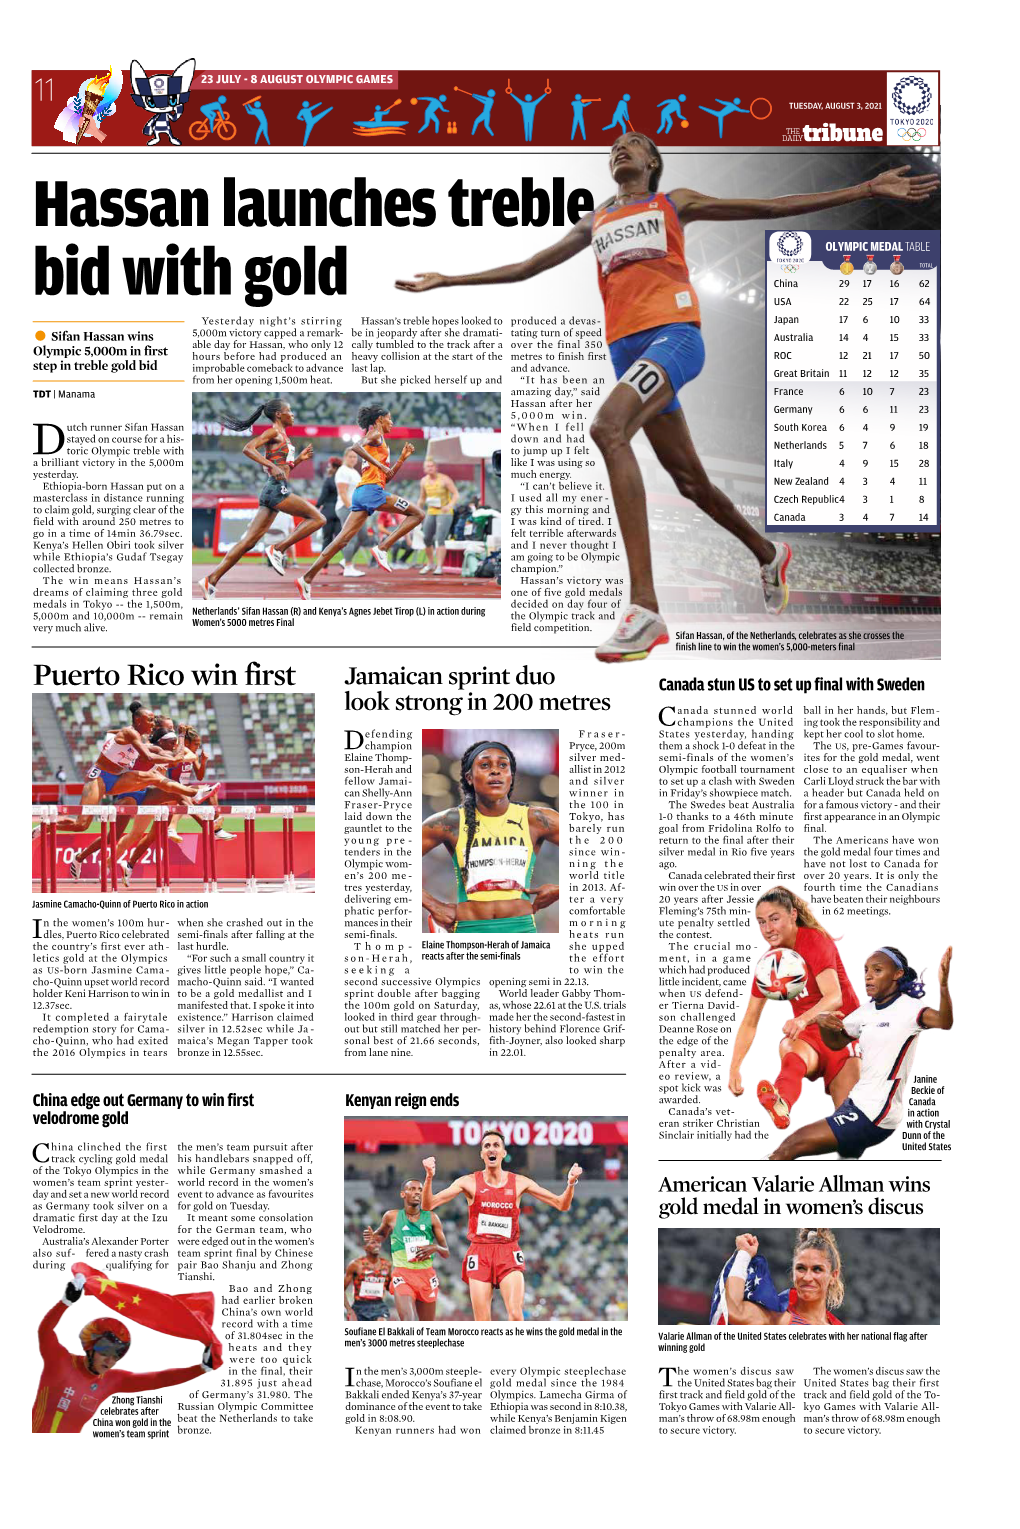 Hassan Launches Treble Bid with Gold